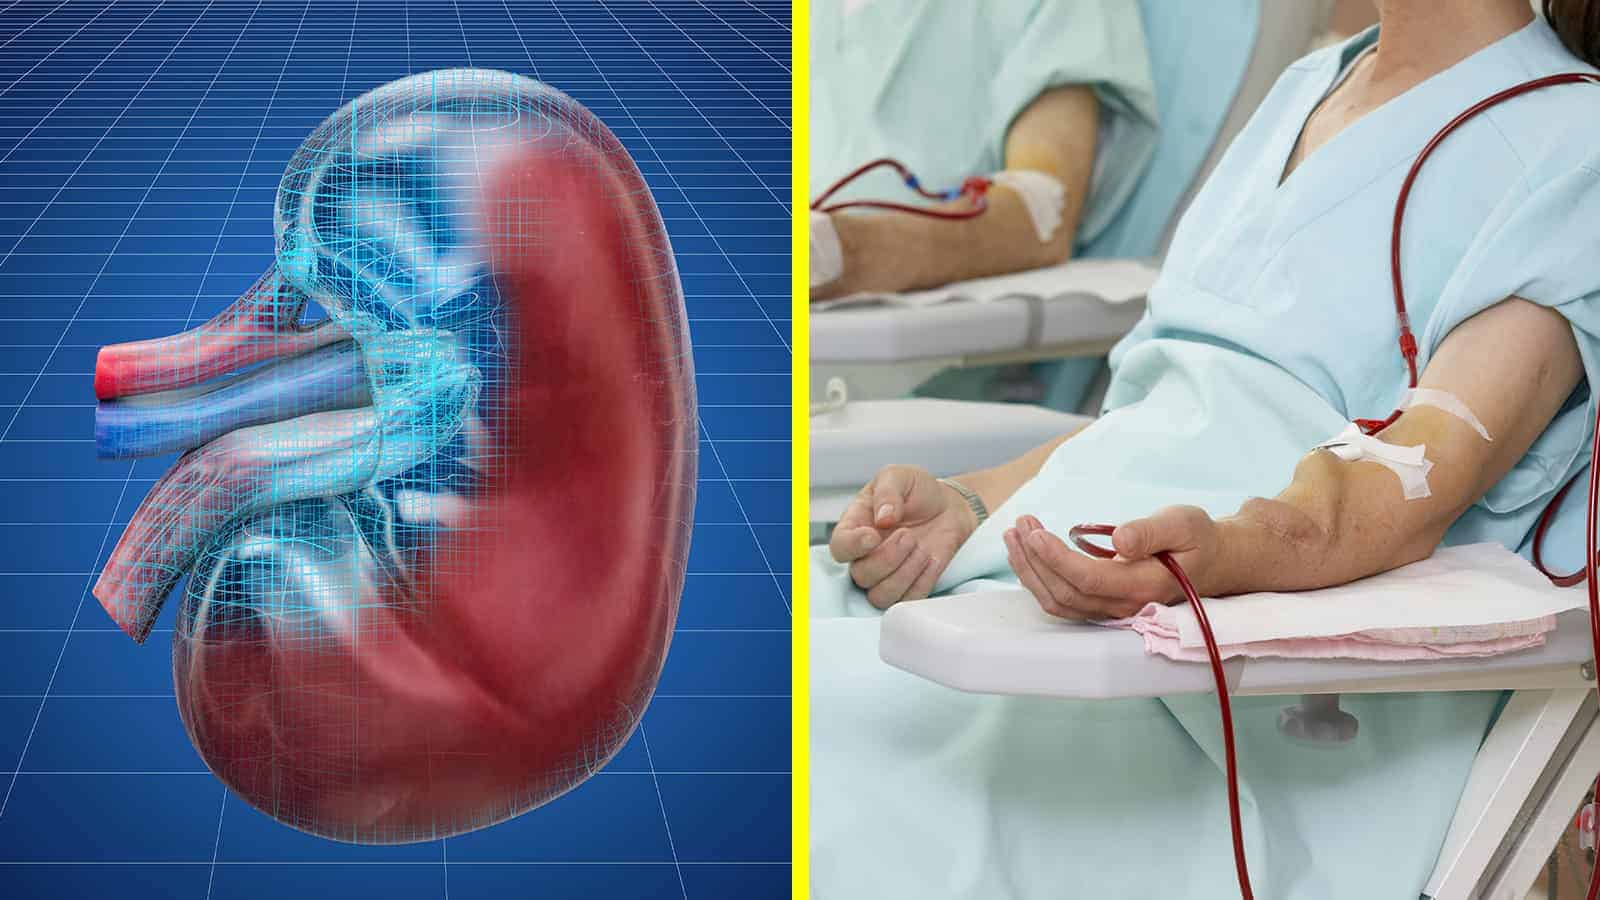 Scientists Explain How an Artificial Kidney Could Replace Dialysis